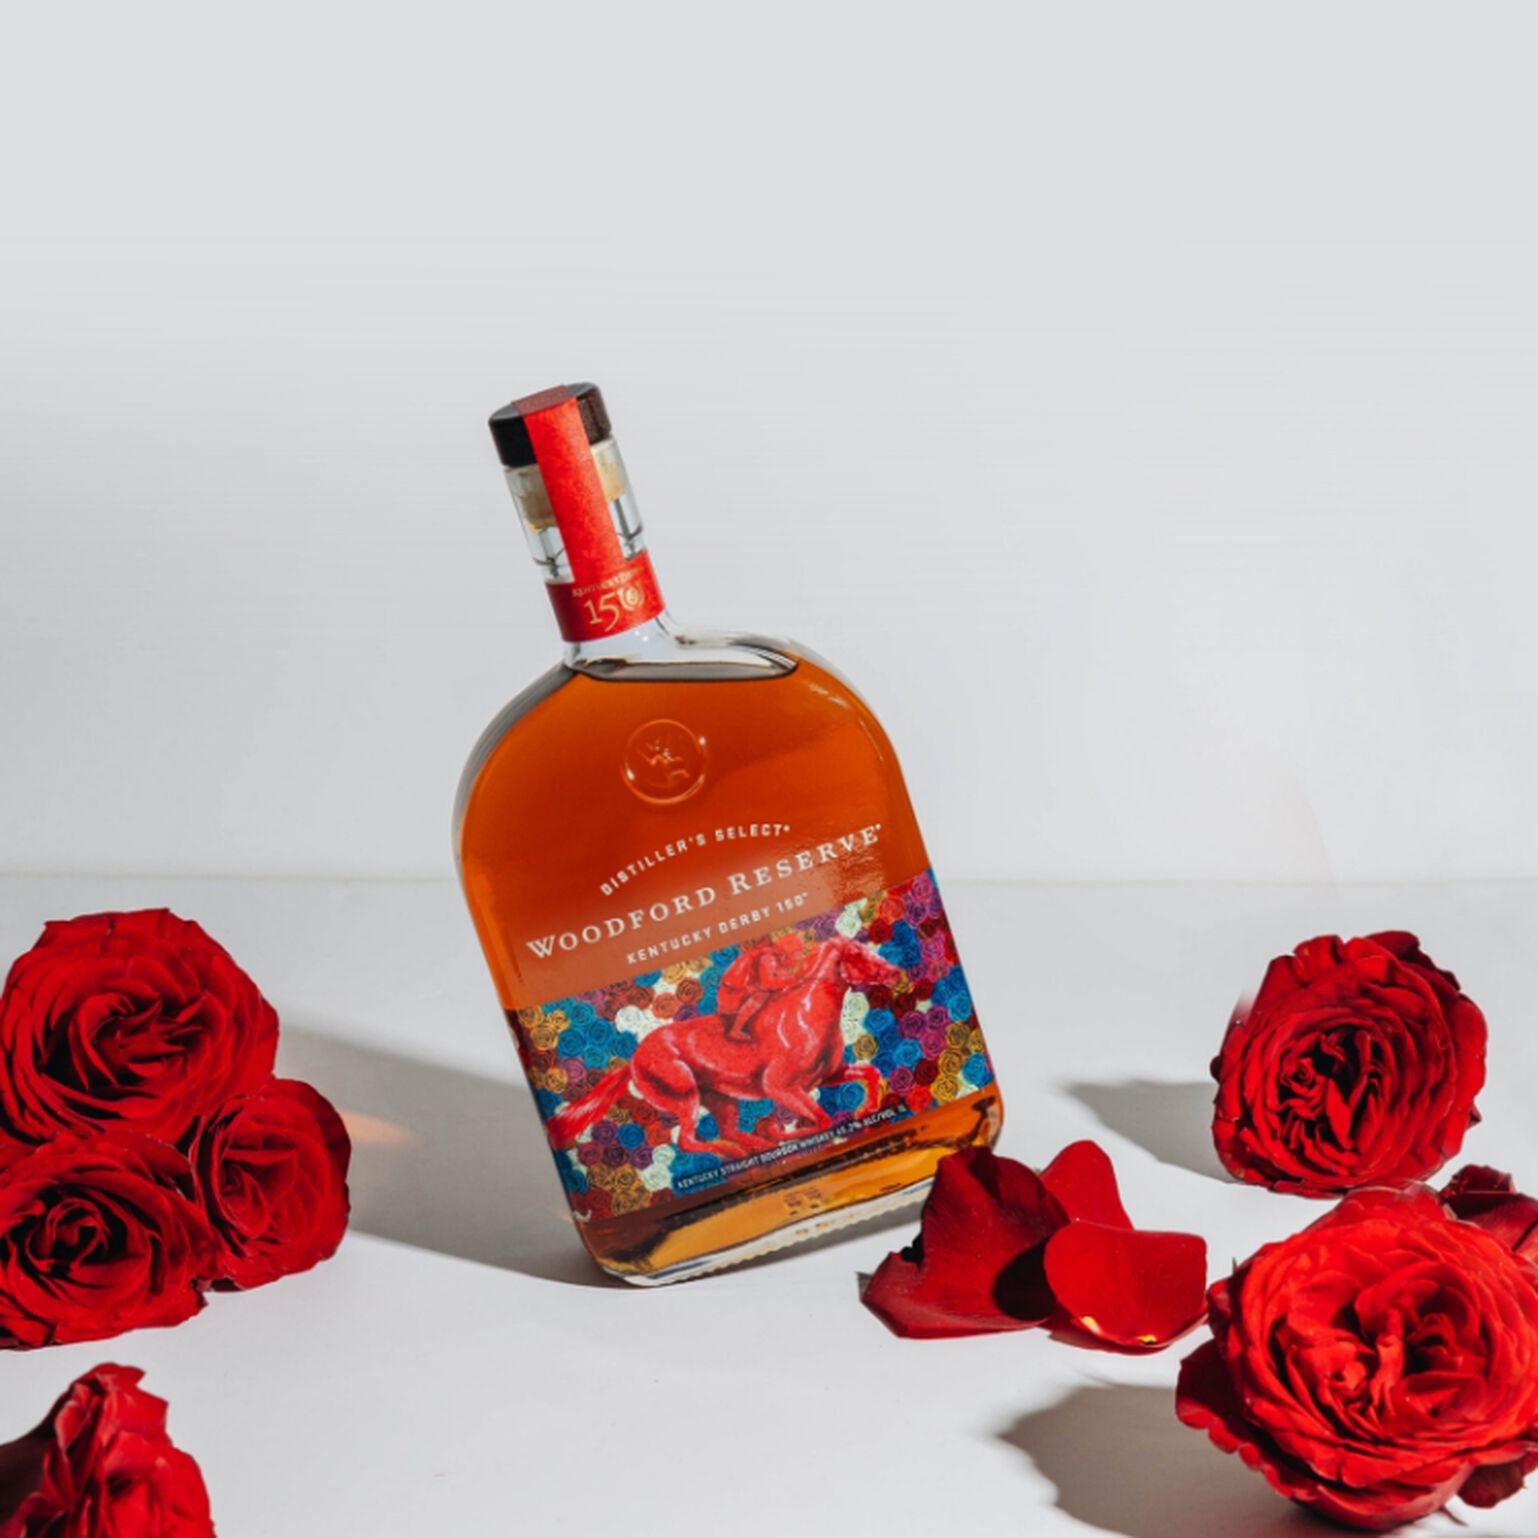 Bottle of Woodford Reserve Kentucky Derby 150 with roses